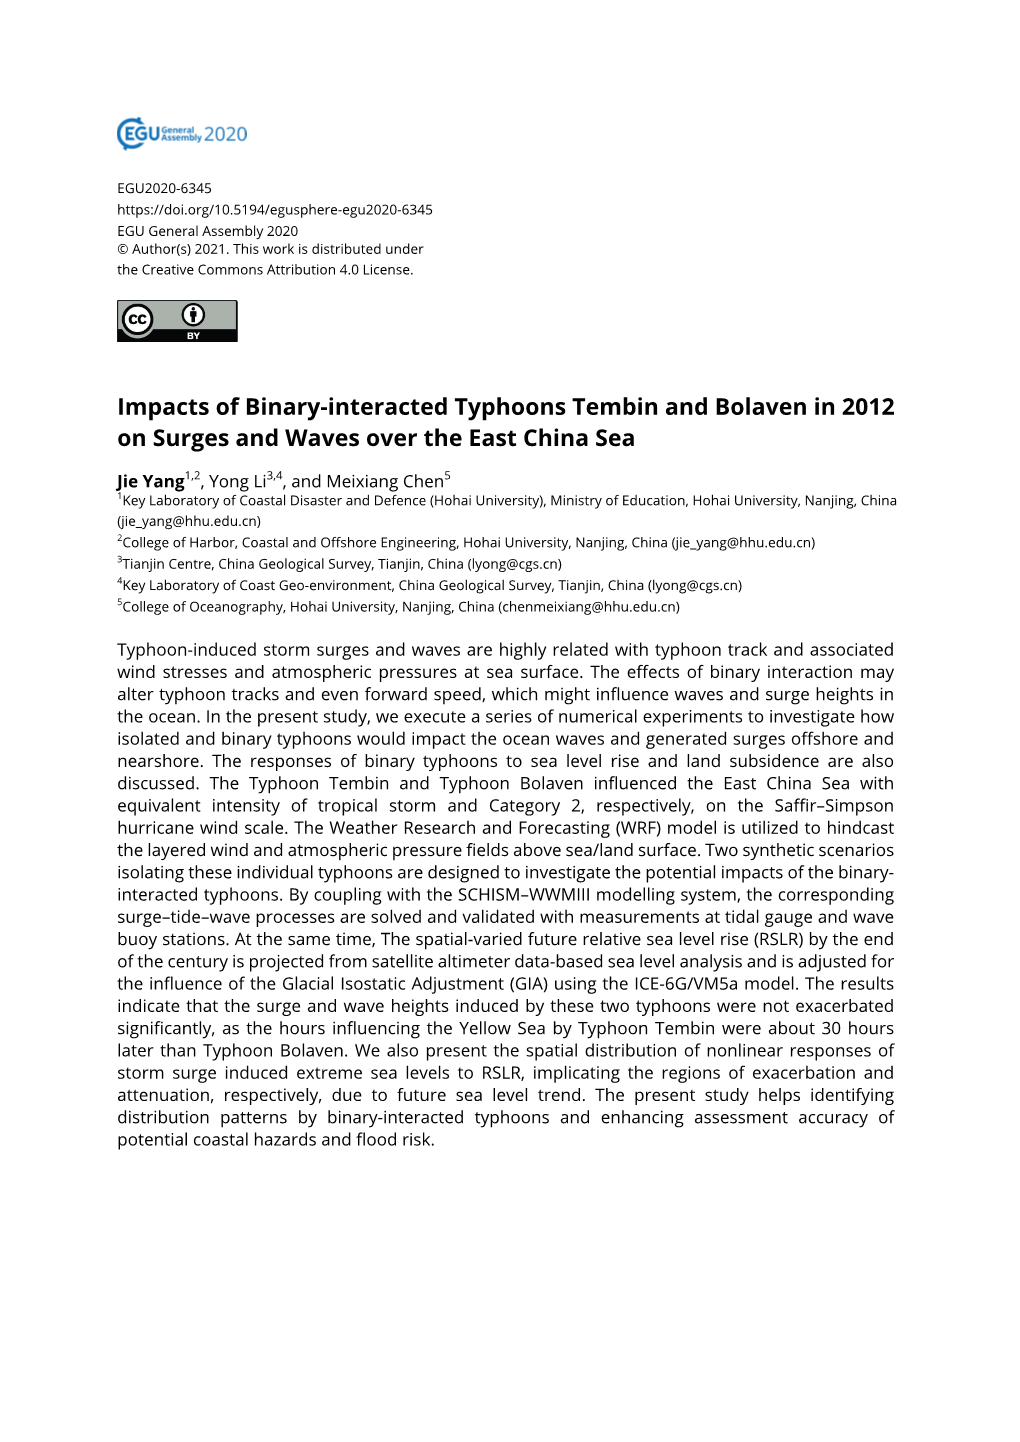 Impacts of Binary-Interacted Typhoons Tembin and Bolaven in 2012 on Surges and Waves Over the East China Sea